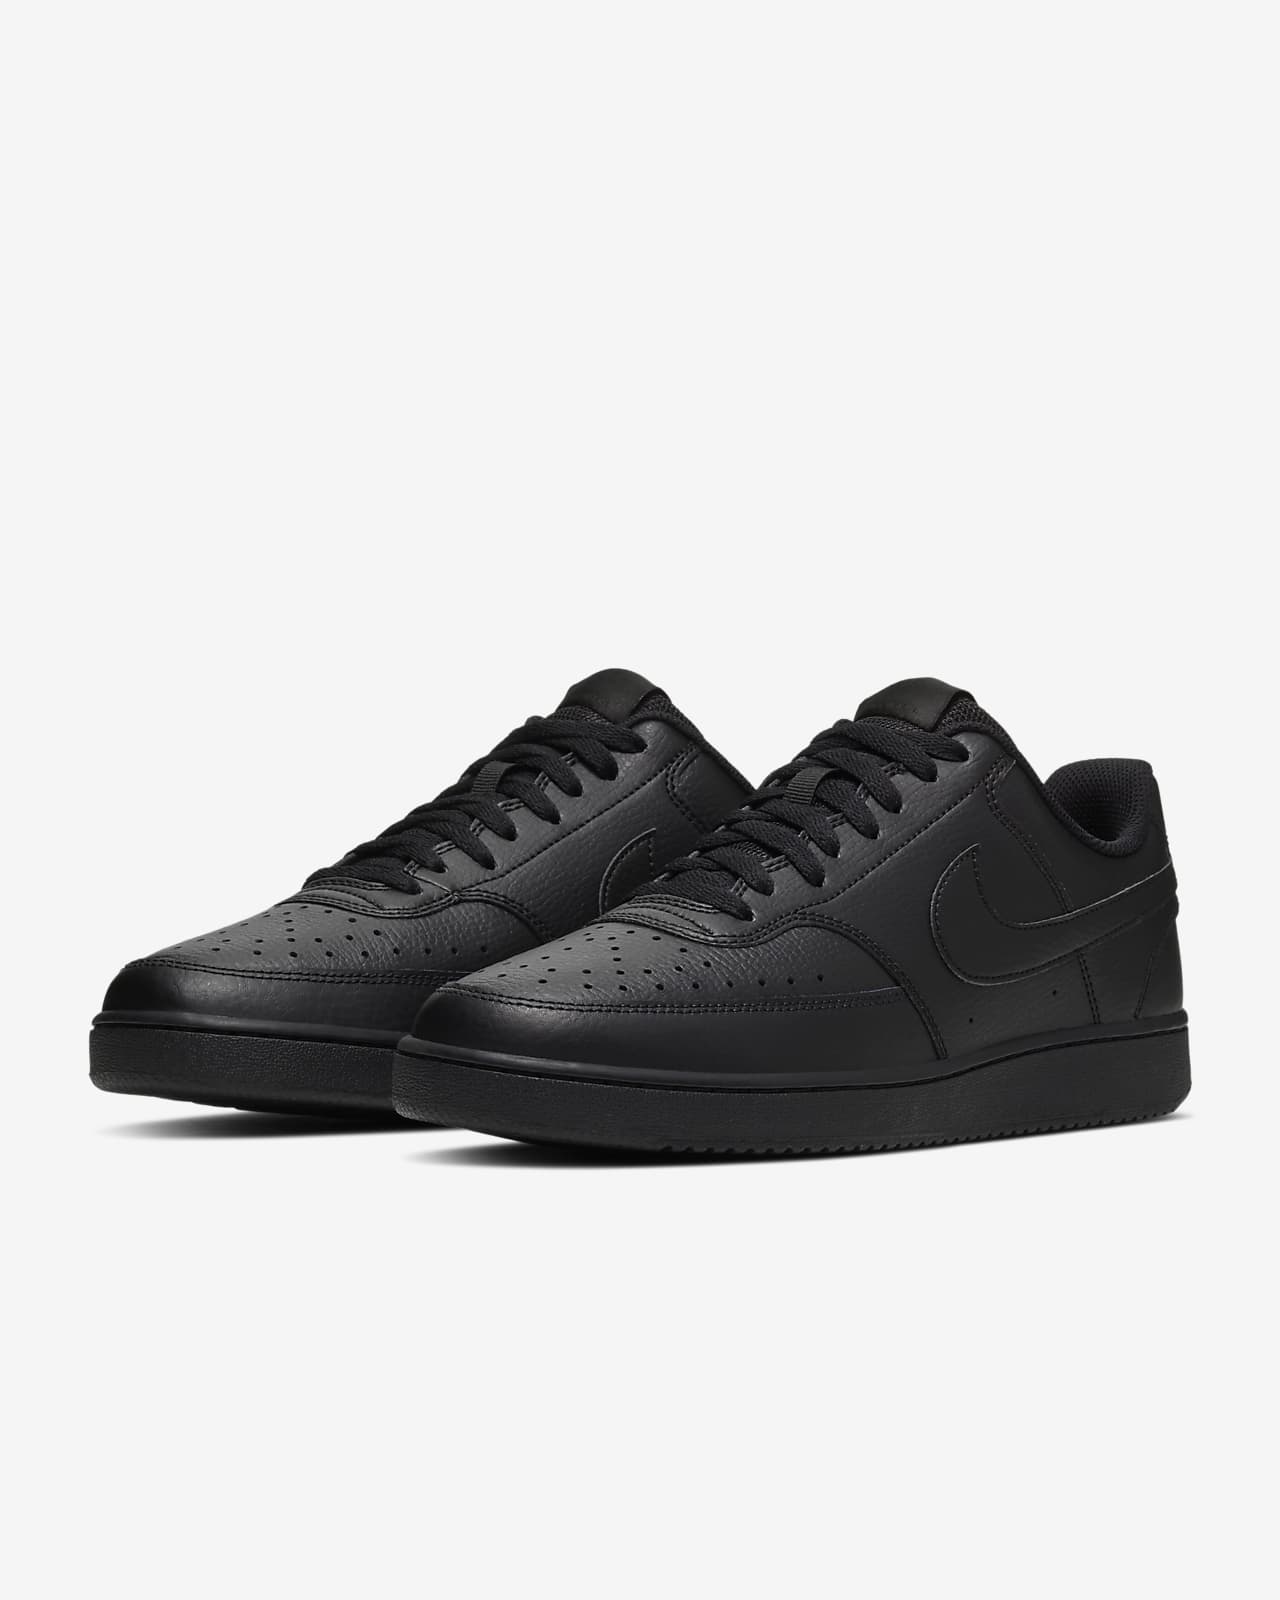 nike casual court vision low